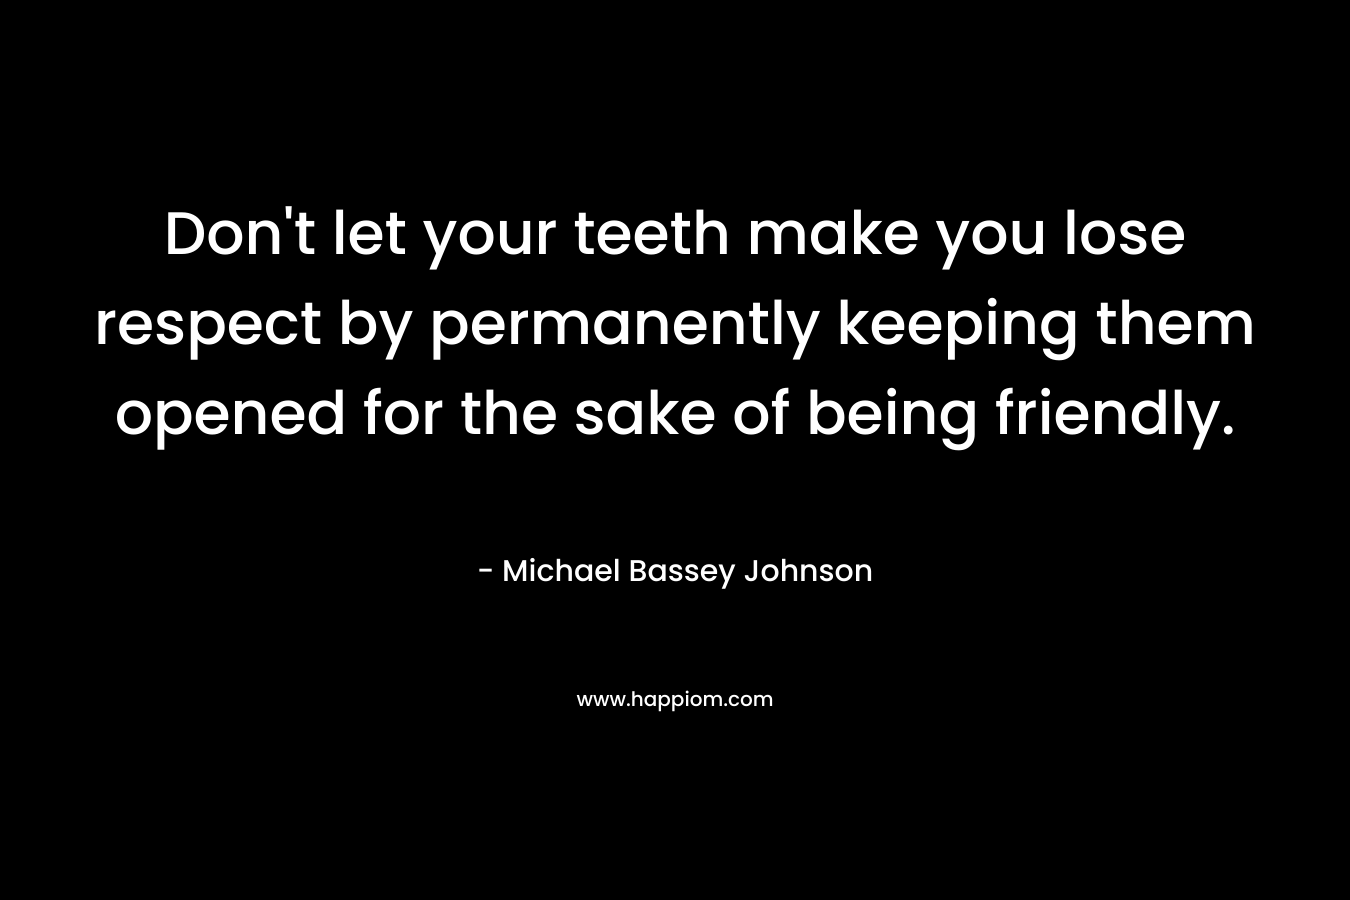 Don't let your teeth make you lose respect by permanently keeping them opened for the sake of being friendly.